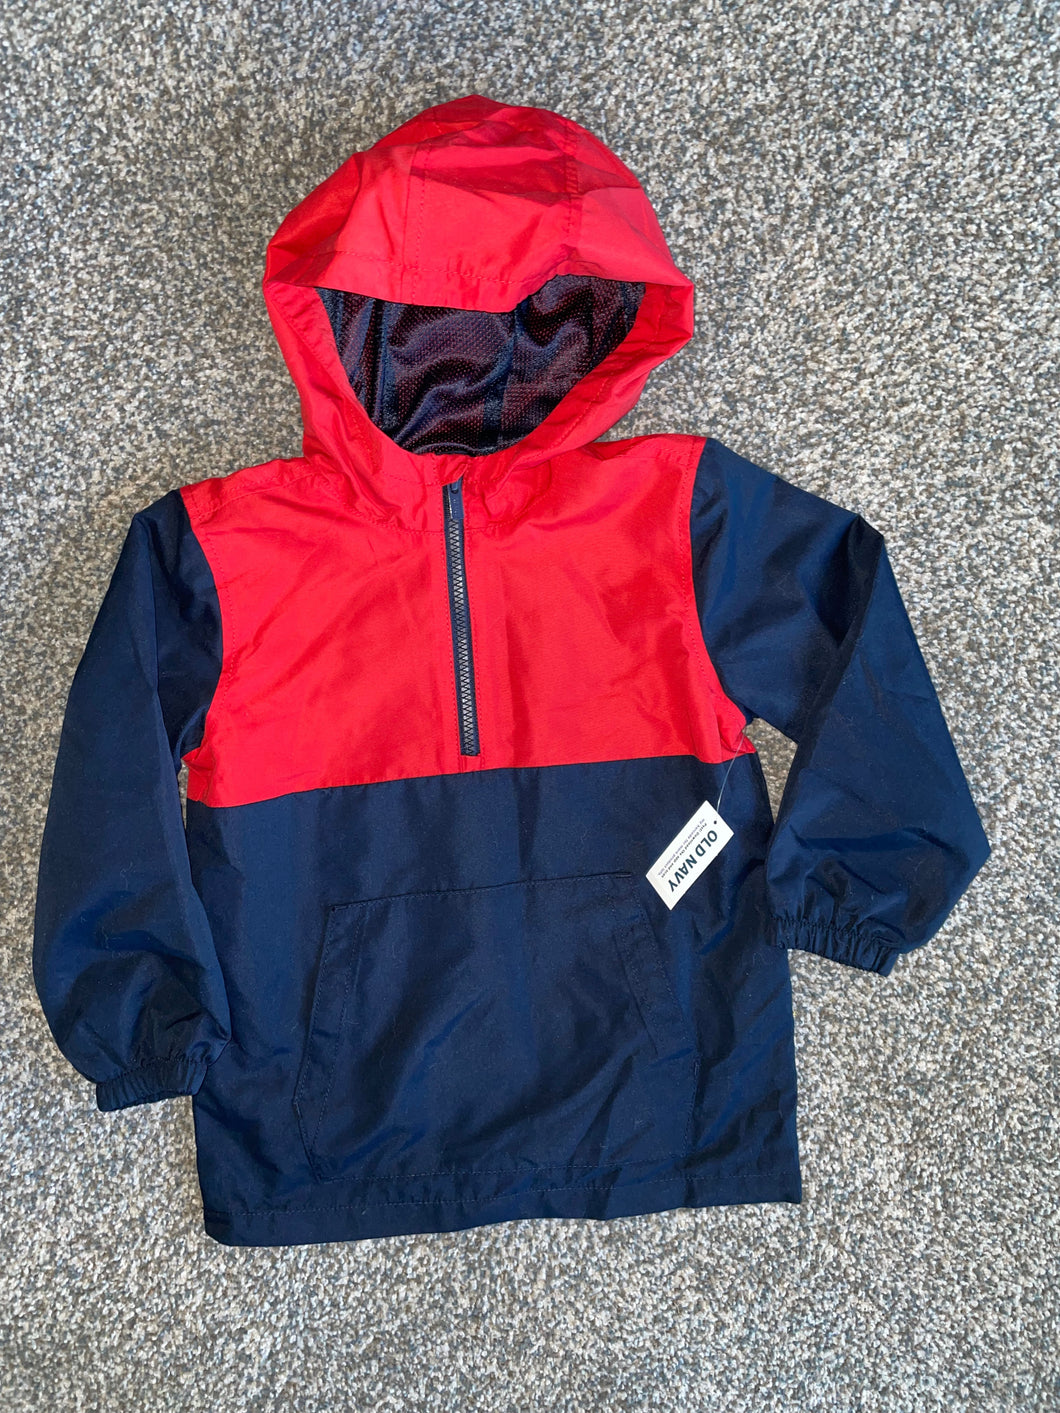 NWT Old Navy Red and Navy Lightweight Jacket 5T